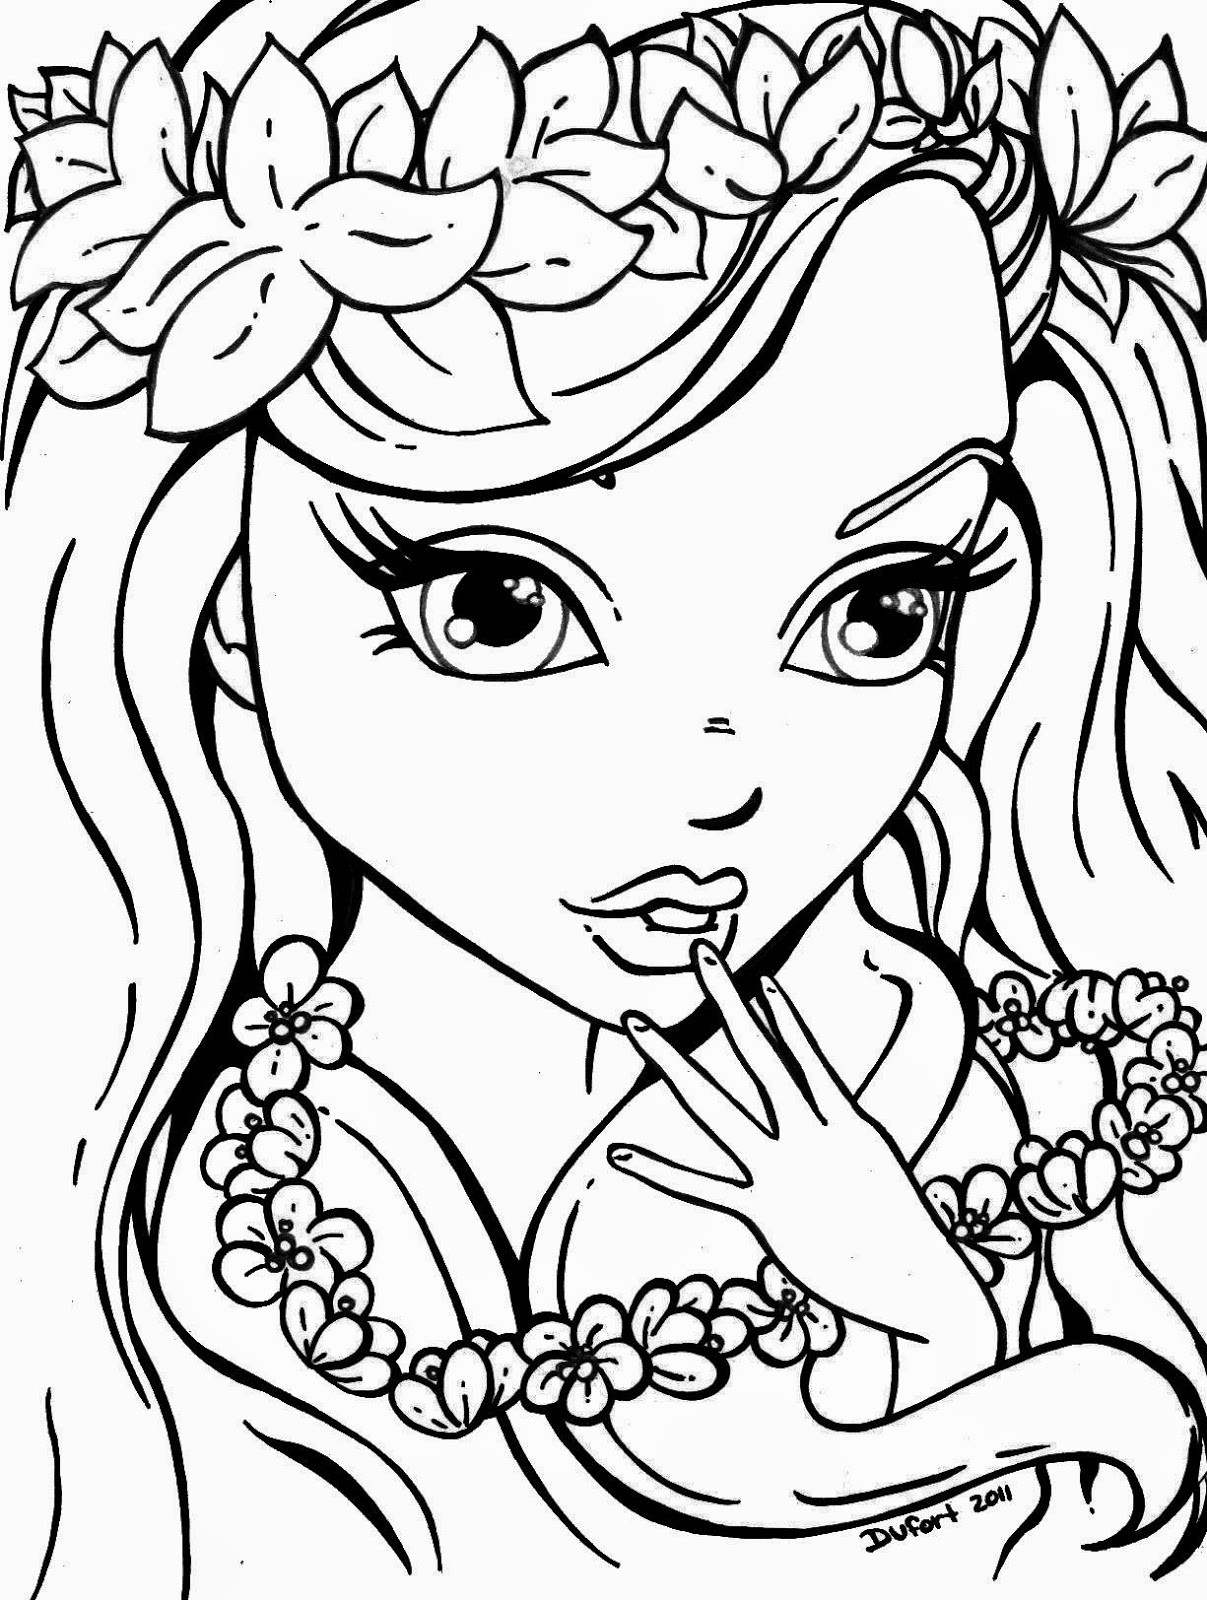 Coloring Sheets For Girls 8 10
 Free Coloring Pages For Girls Cute Image 5 Gianfreda